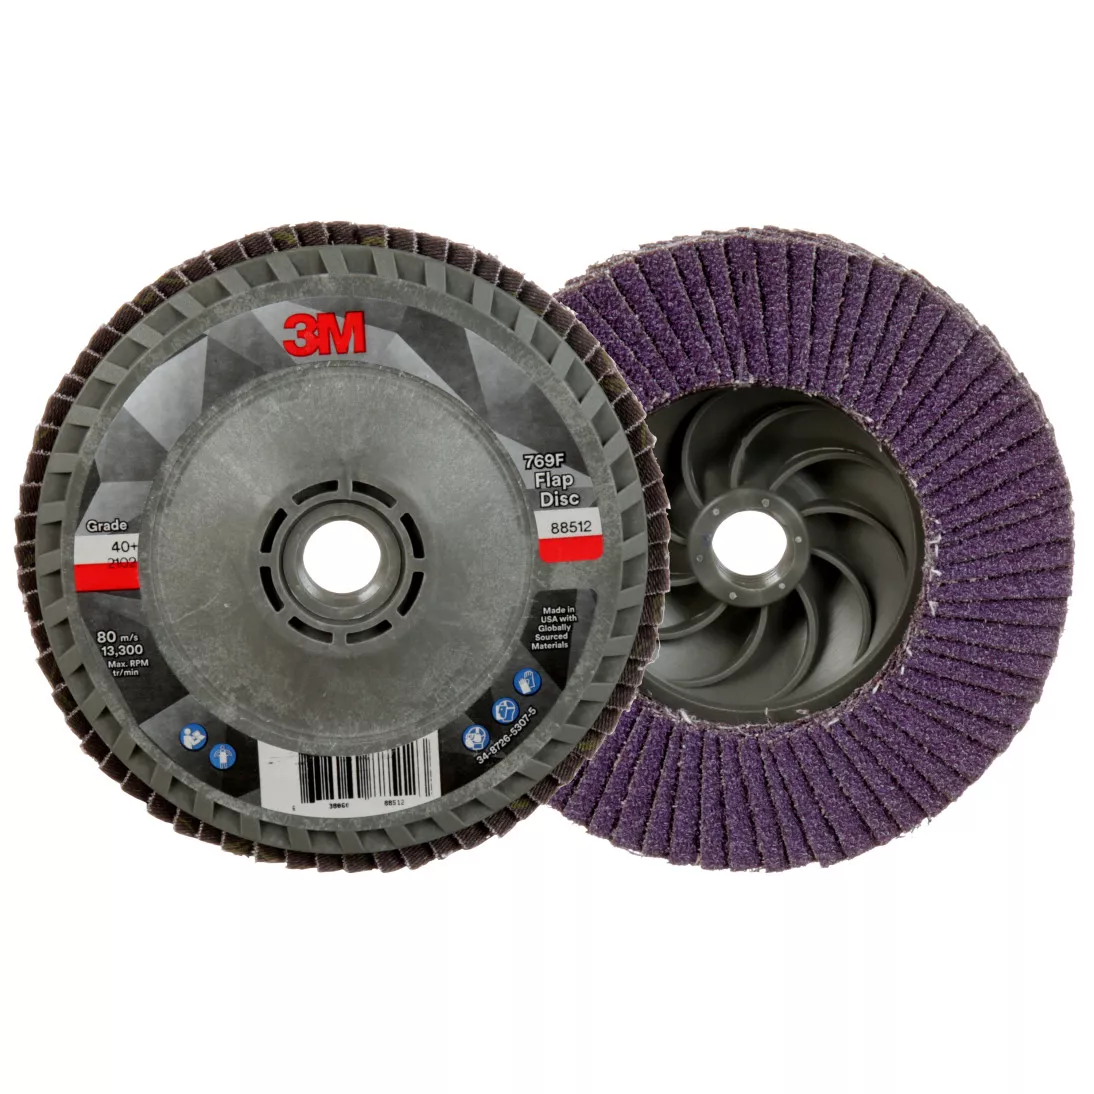 3M™ Flap Disc 769F, 40+, Quick Change, Type 27, 4-1/2 in x 5/8 in-11, 10
ea/Case